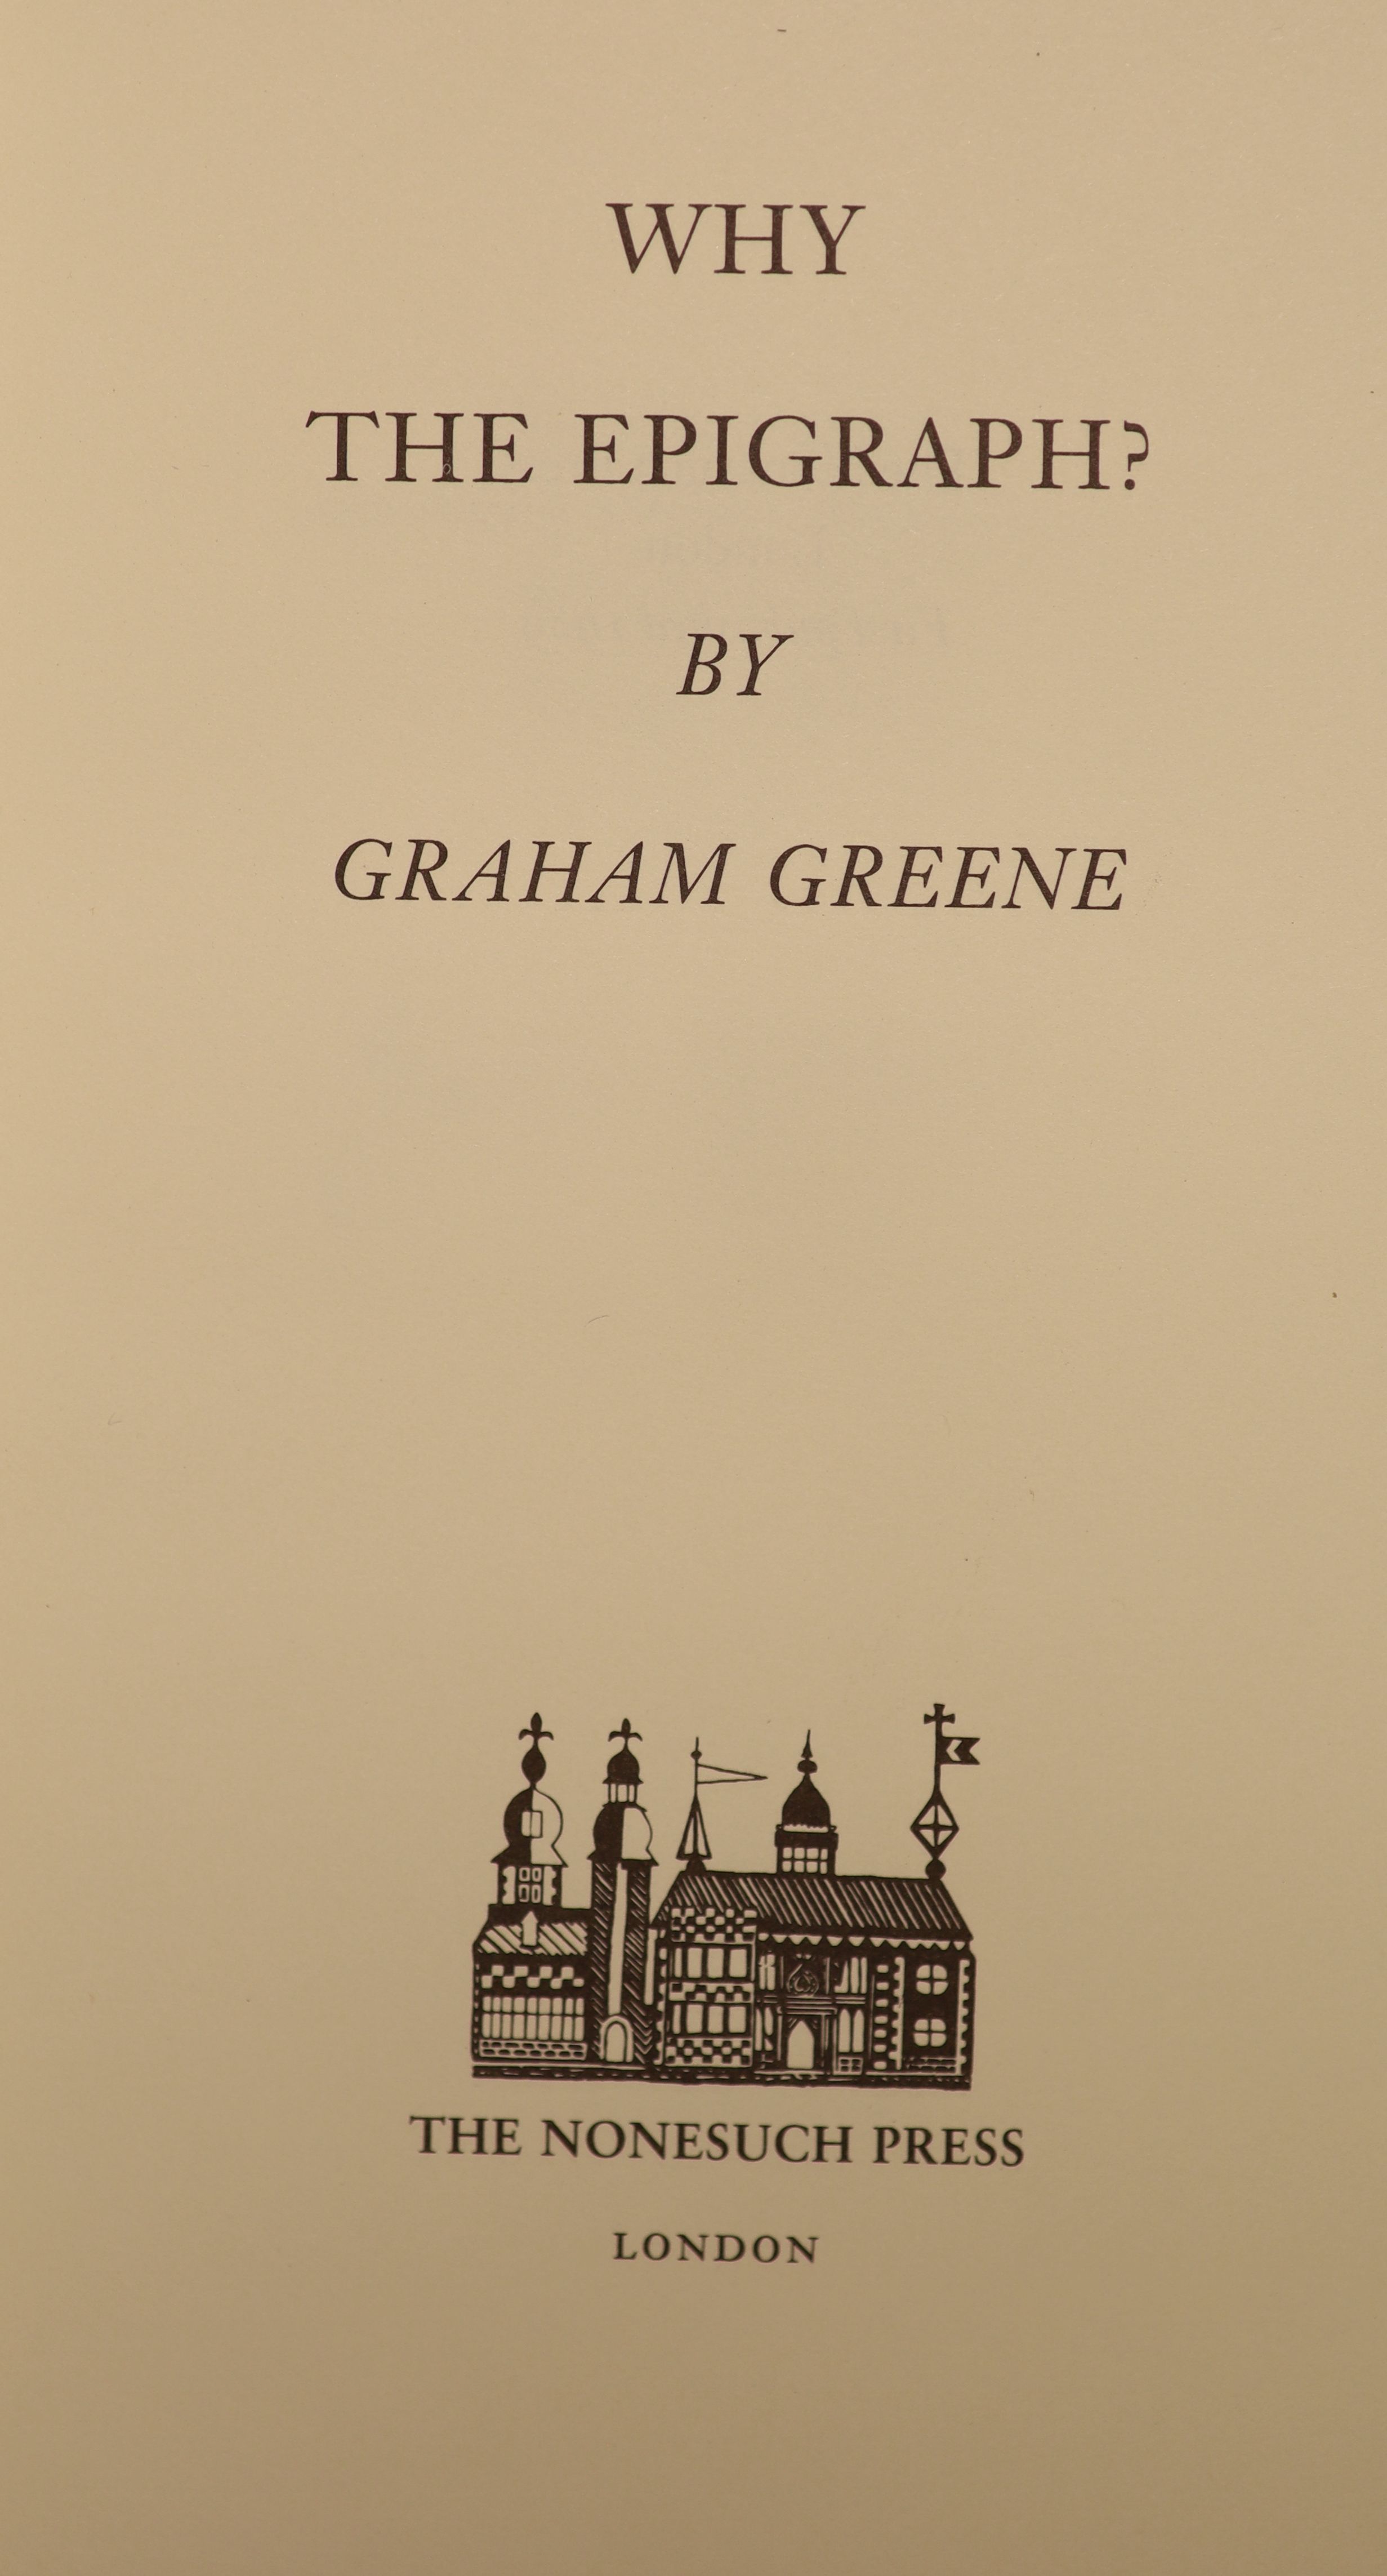 Greene, Graham - 4 works - Why the Epigraph, one of 950 numbered copies, signed by the author, original olive brown cloth, Nonesuch Press, London, 1989; The Little Horse Bus, illustrated by Edward Ardizzone, The Bodley H